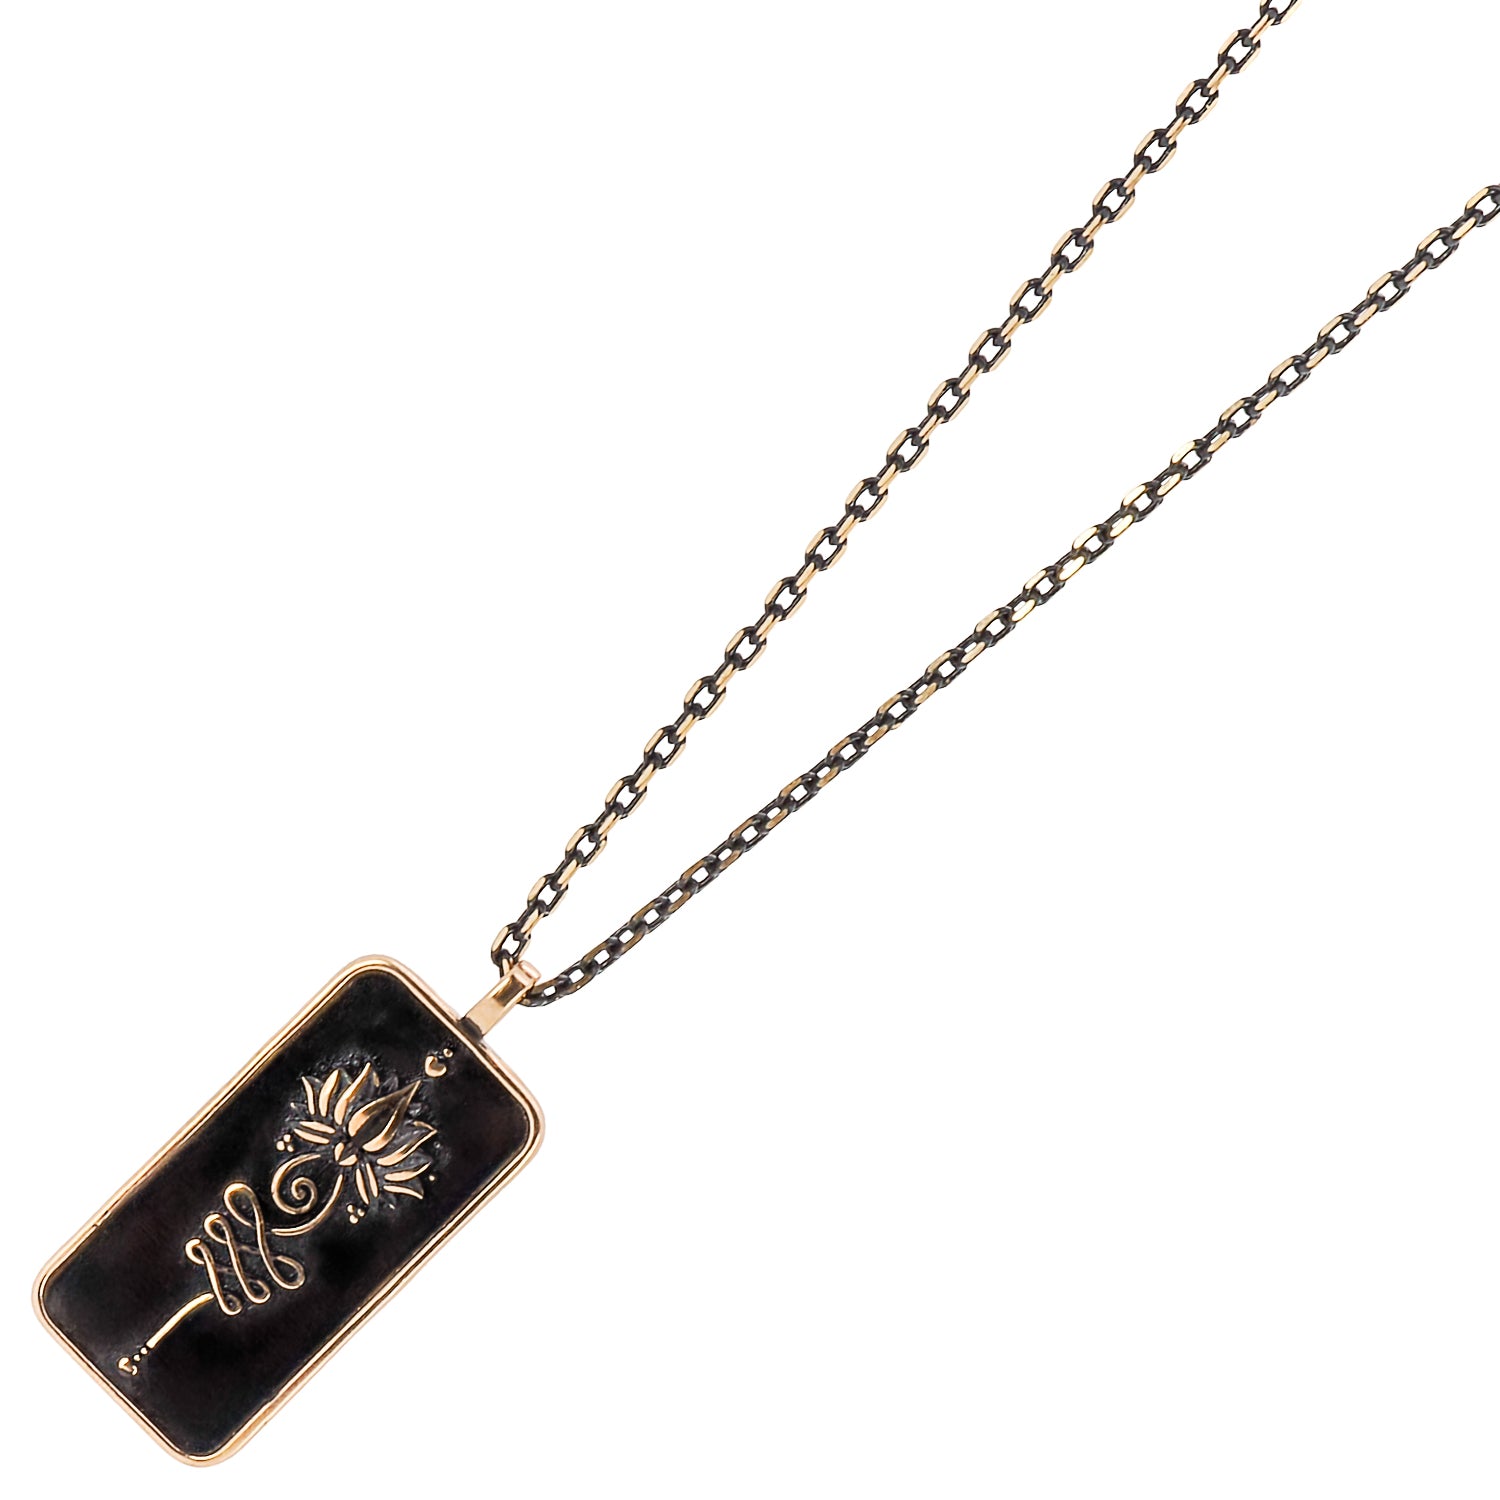 Witness the elegance and significance of the Love Yourself Unalome Necklace, a reminder to embrace self-love and find inner peace.